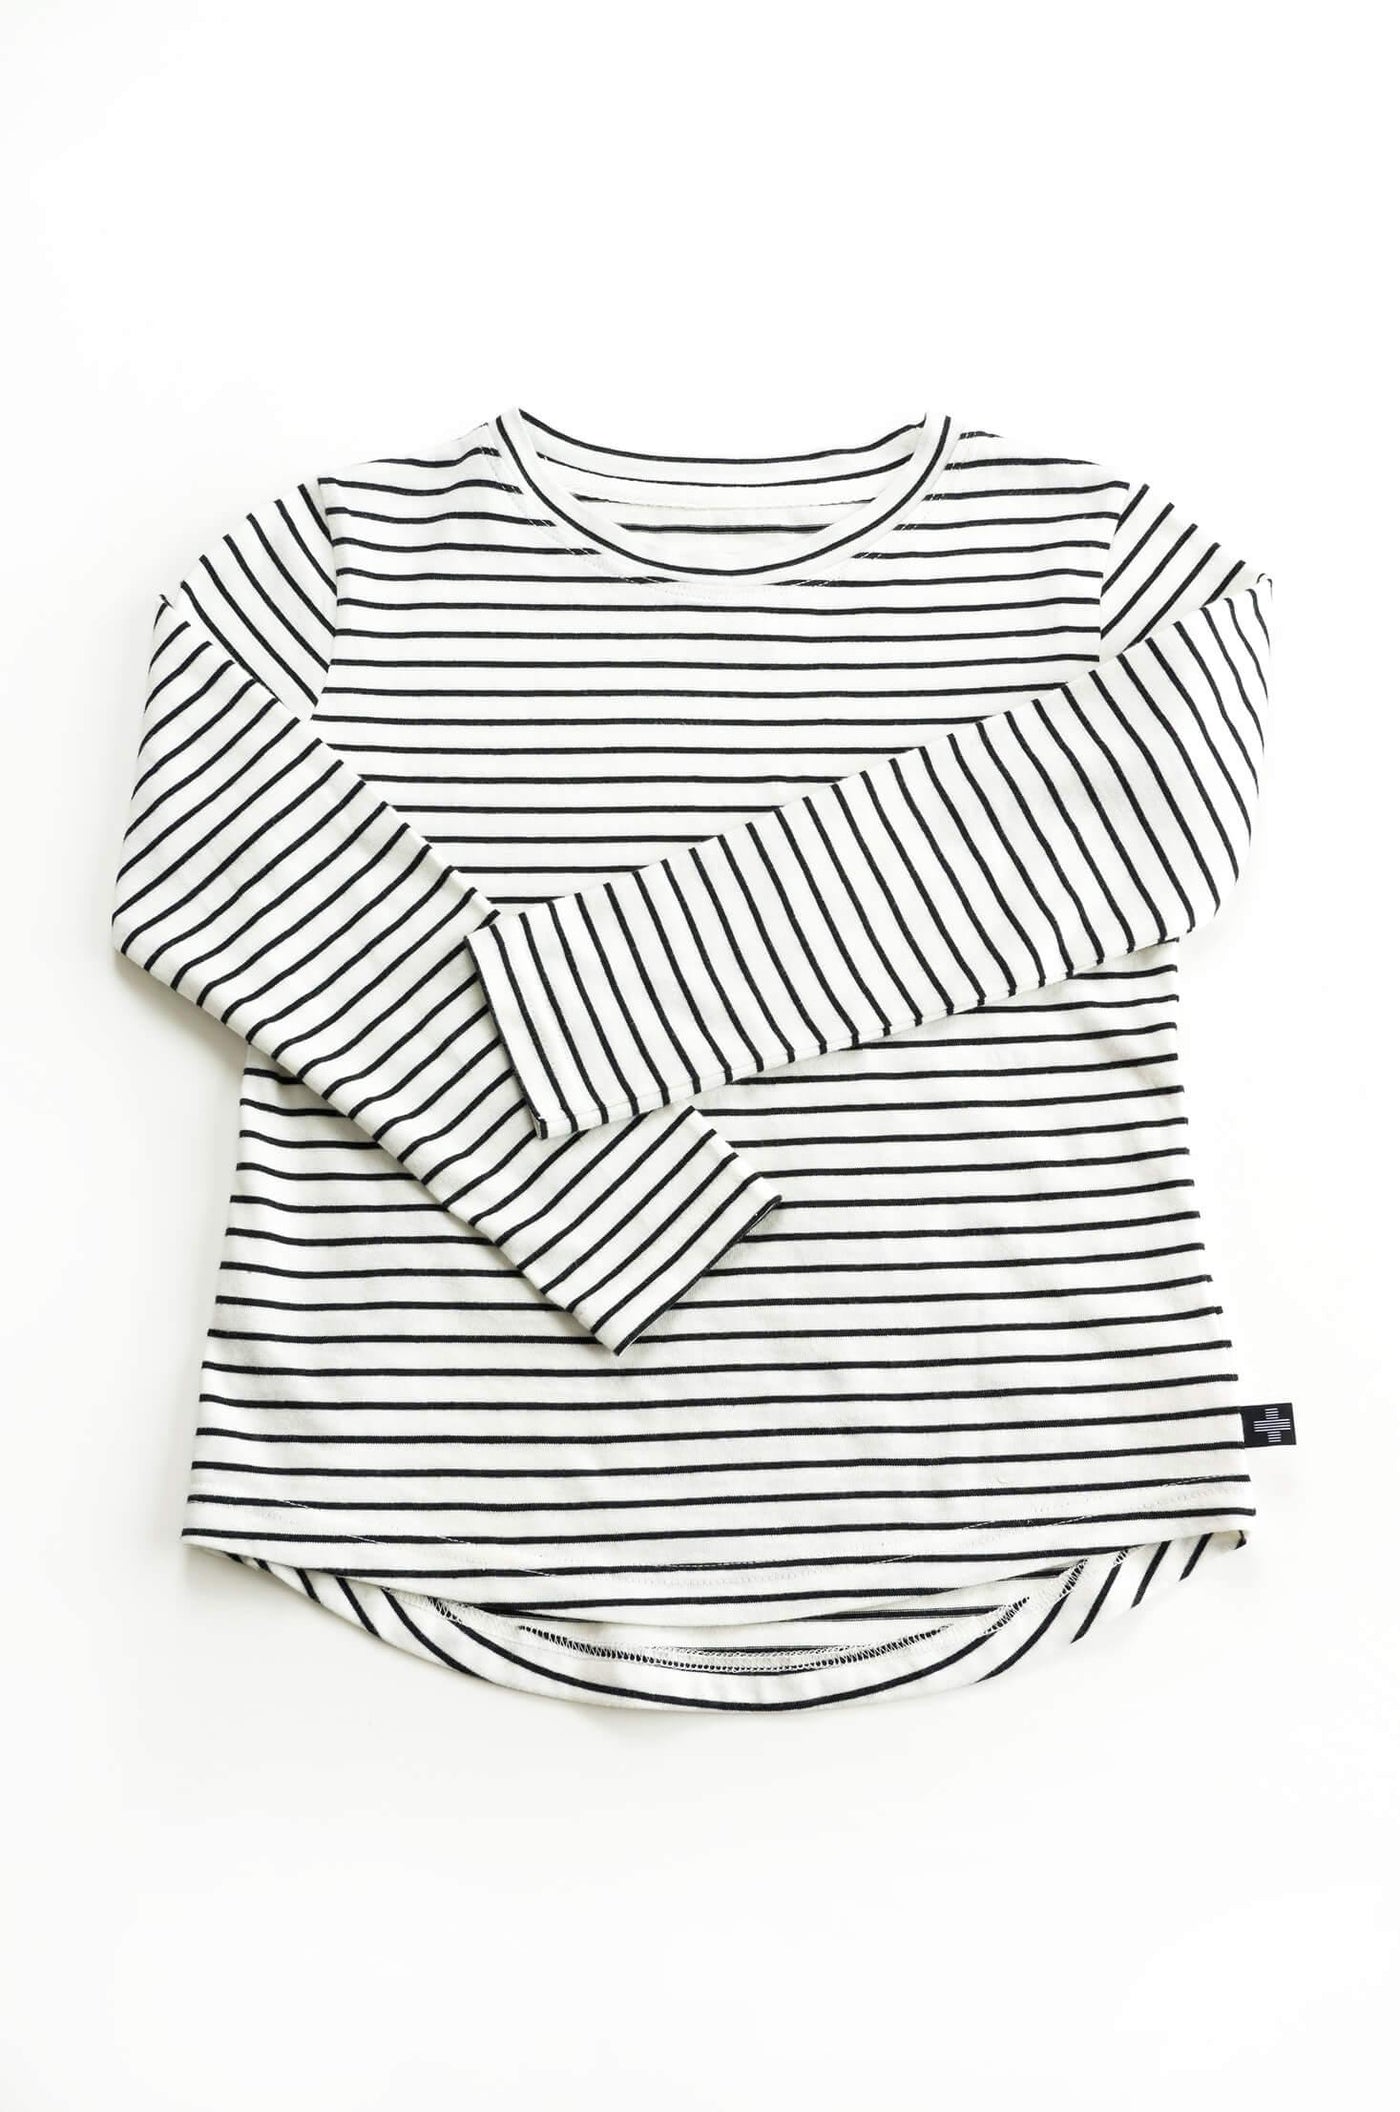 White with black stripes 100% organic cotton long sleeve shirt.  Ethically made and designed by Author Clothing.